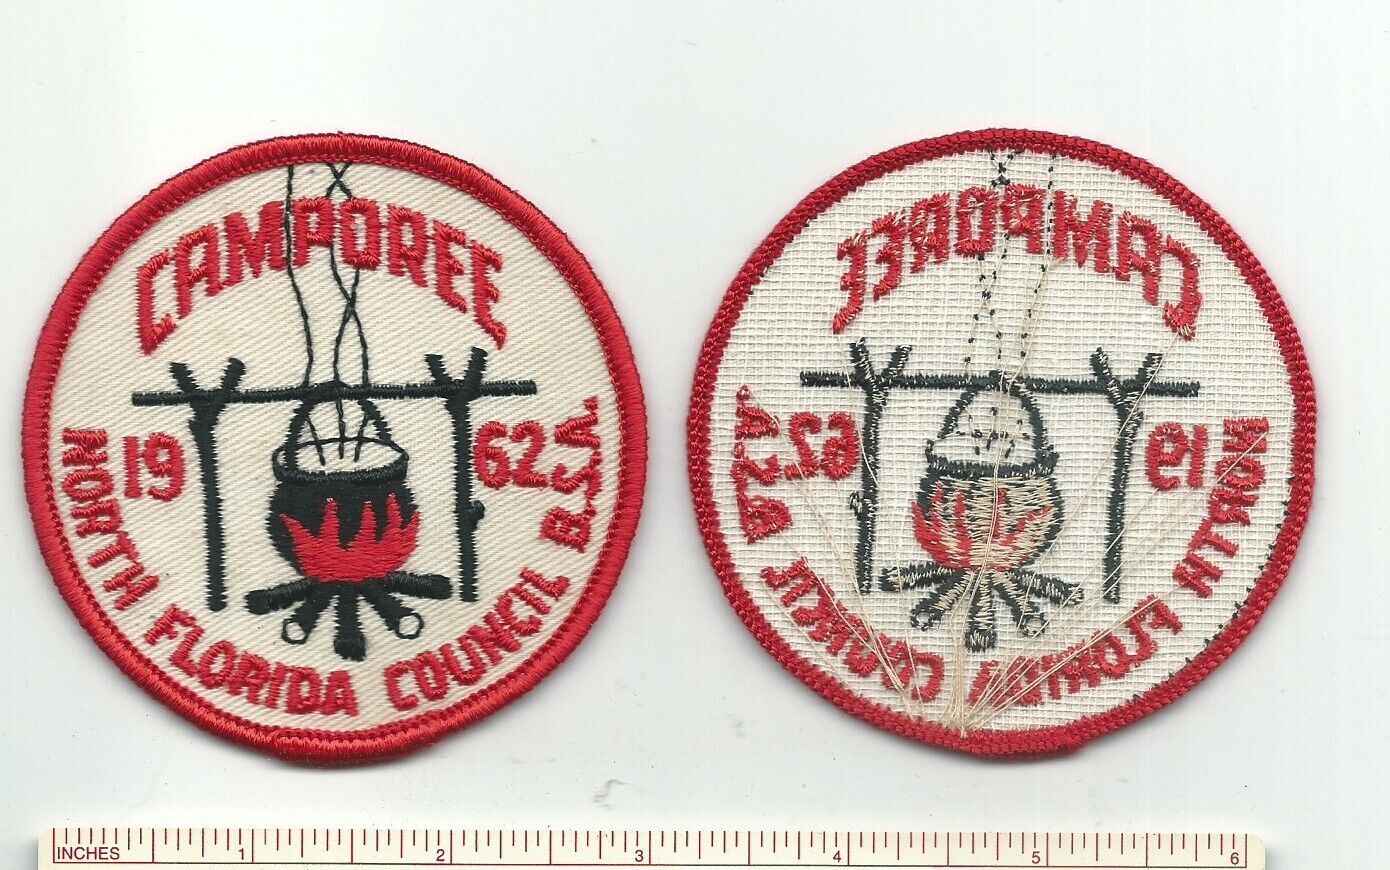 DX SCOUT BSA 1962 NORTH FLORIDA COUNCIL CAMPOREE PATCH KETTLE ON CAMPFIRE FL 